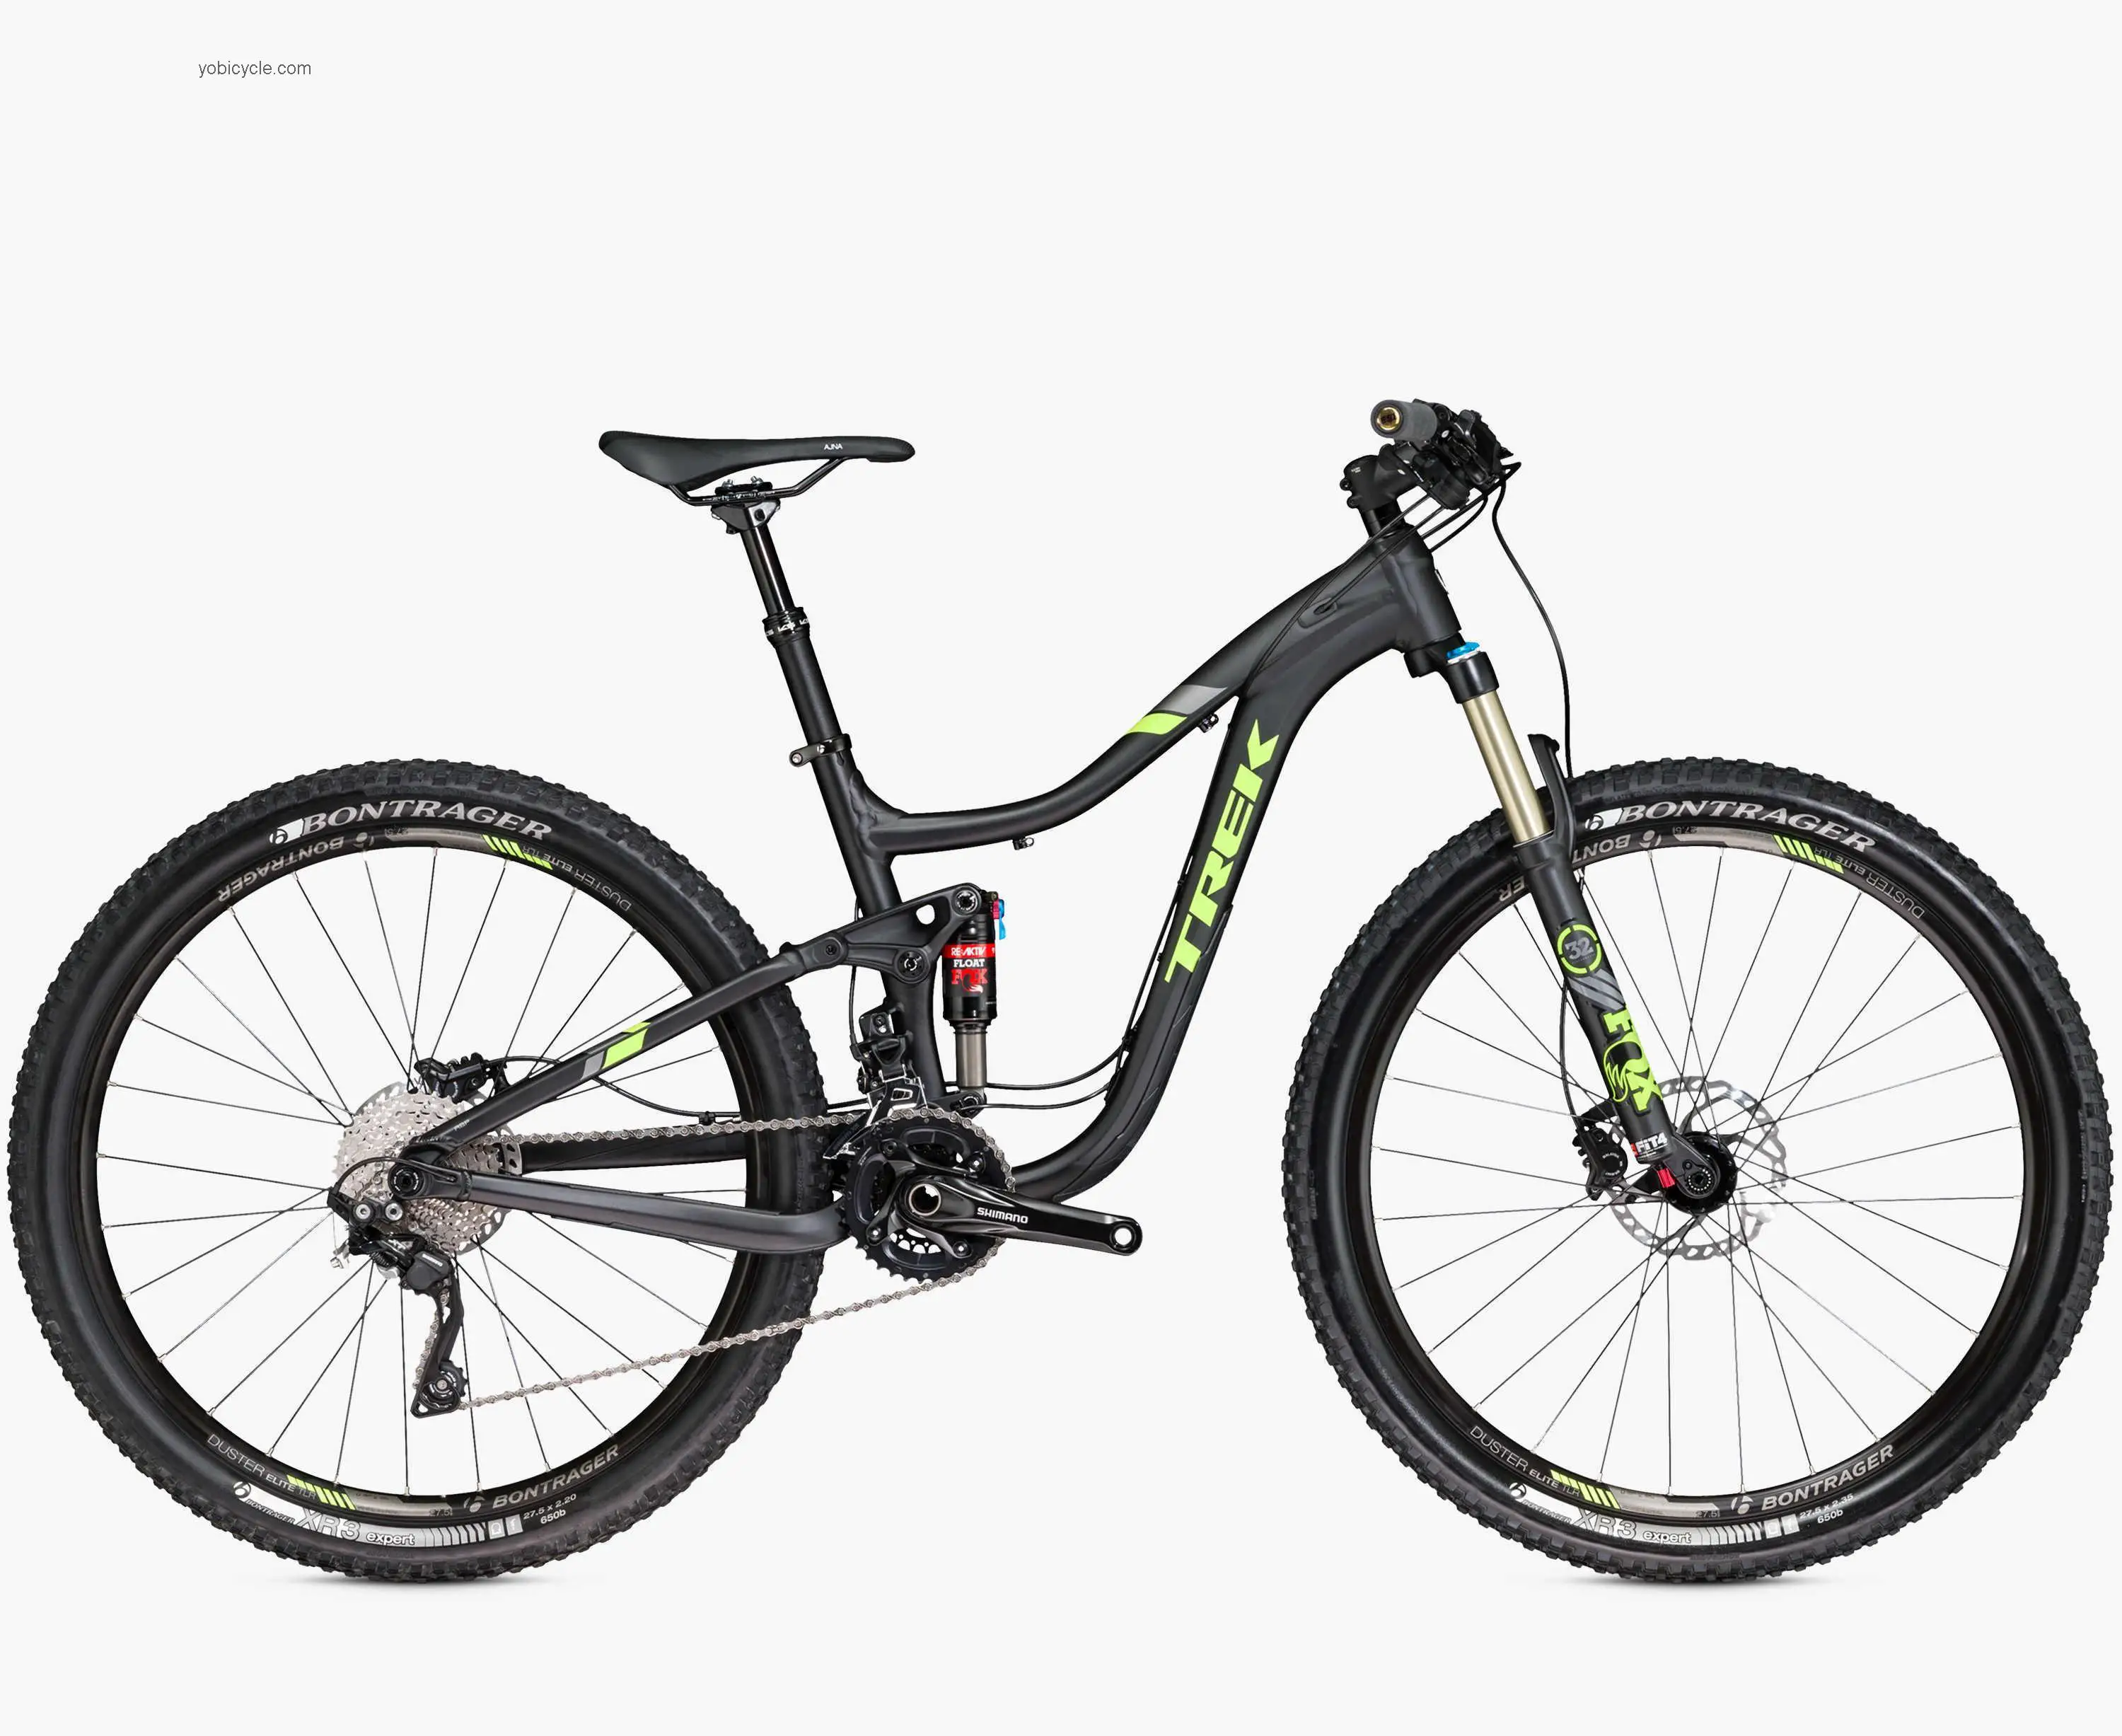 Trek Lush SL 27.5 WSD competitors and comparison tool online specs and performance